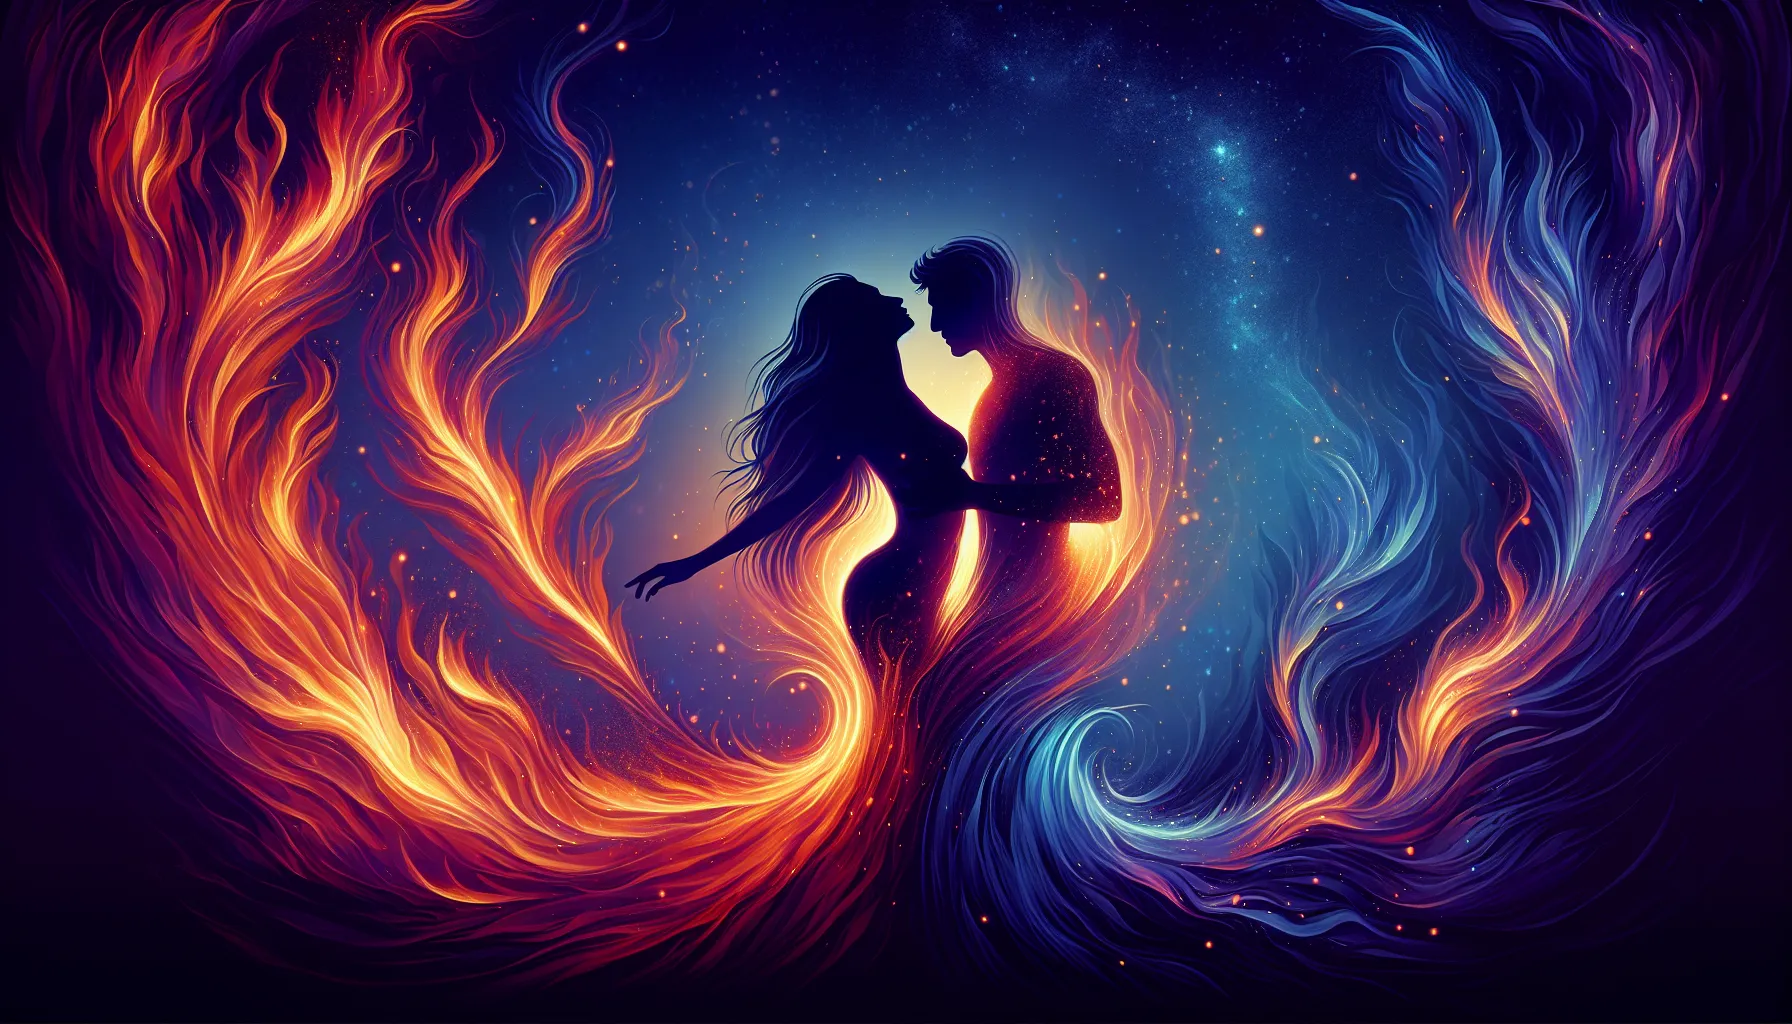 In the waltz of enduring affection, even the faintest spark can ignite a fervent blaze, guiding lovers through a renaissance of passion and playful exploration.